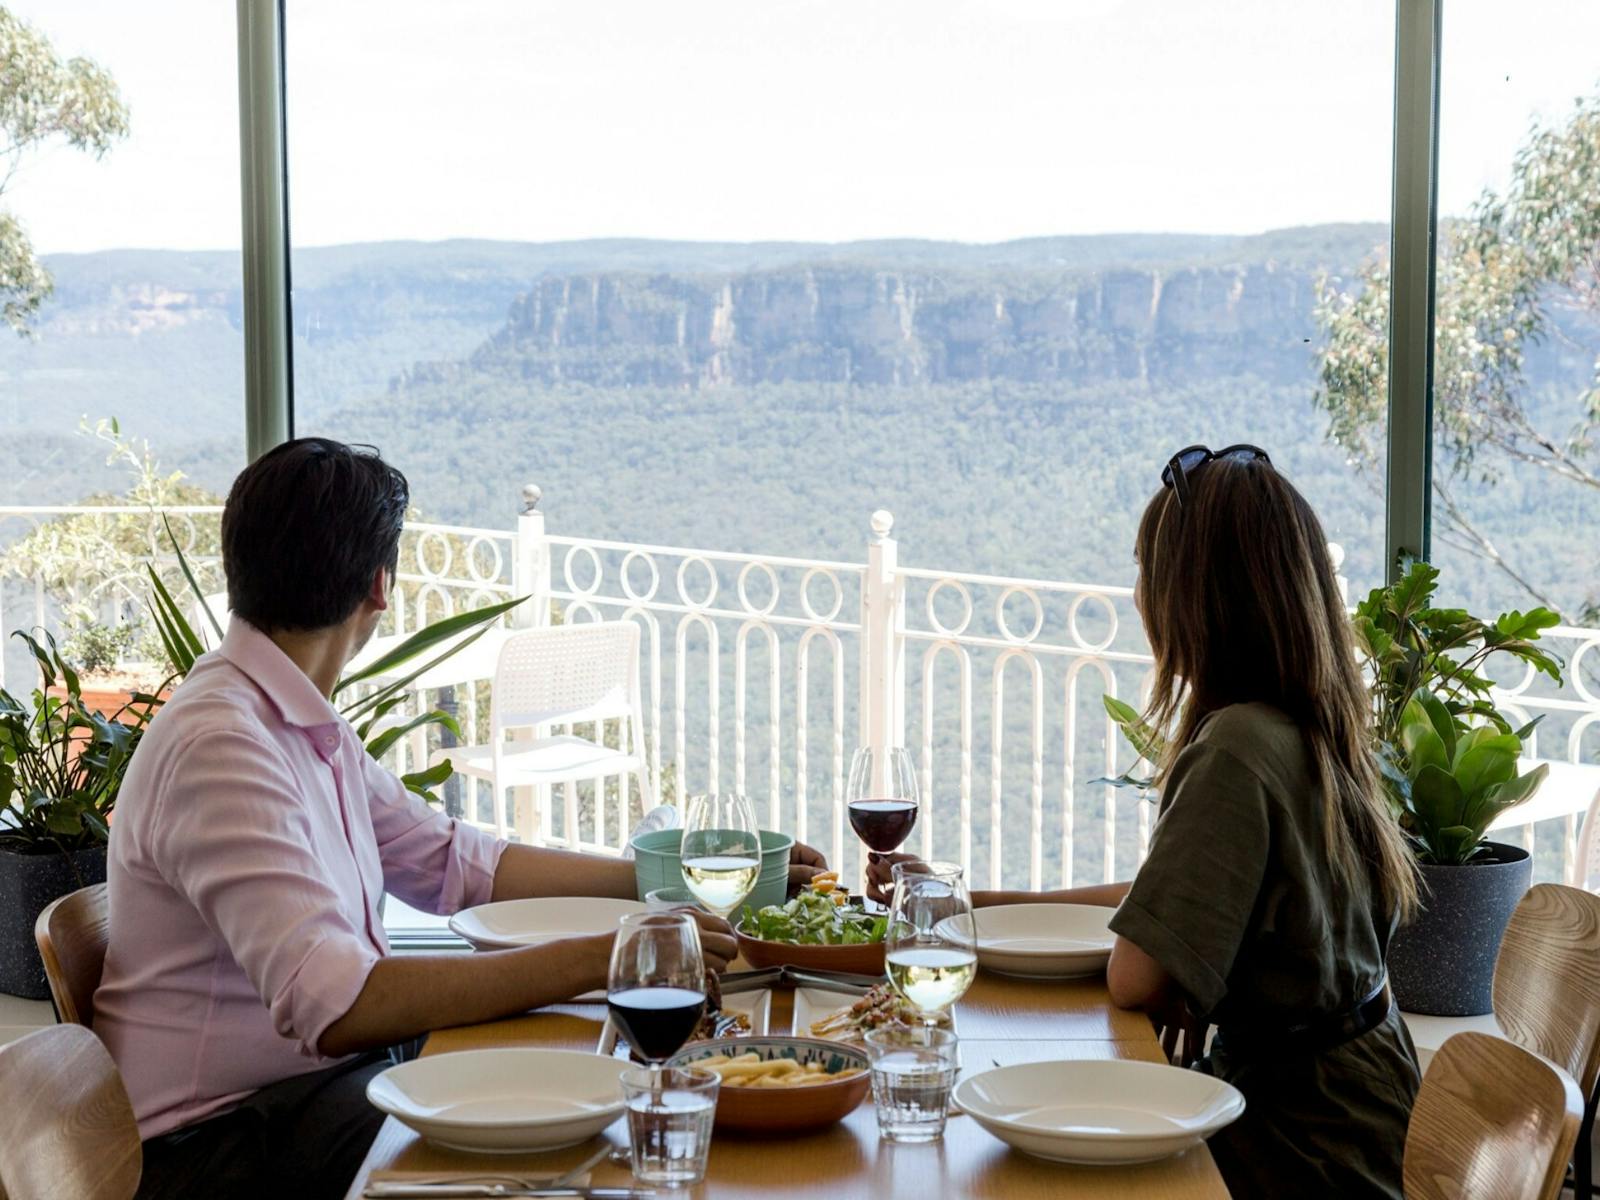 Image for Christmas Day Lunch at The Lookout Echo Point